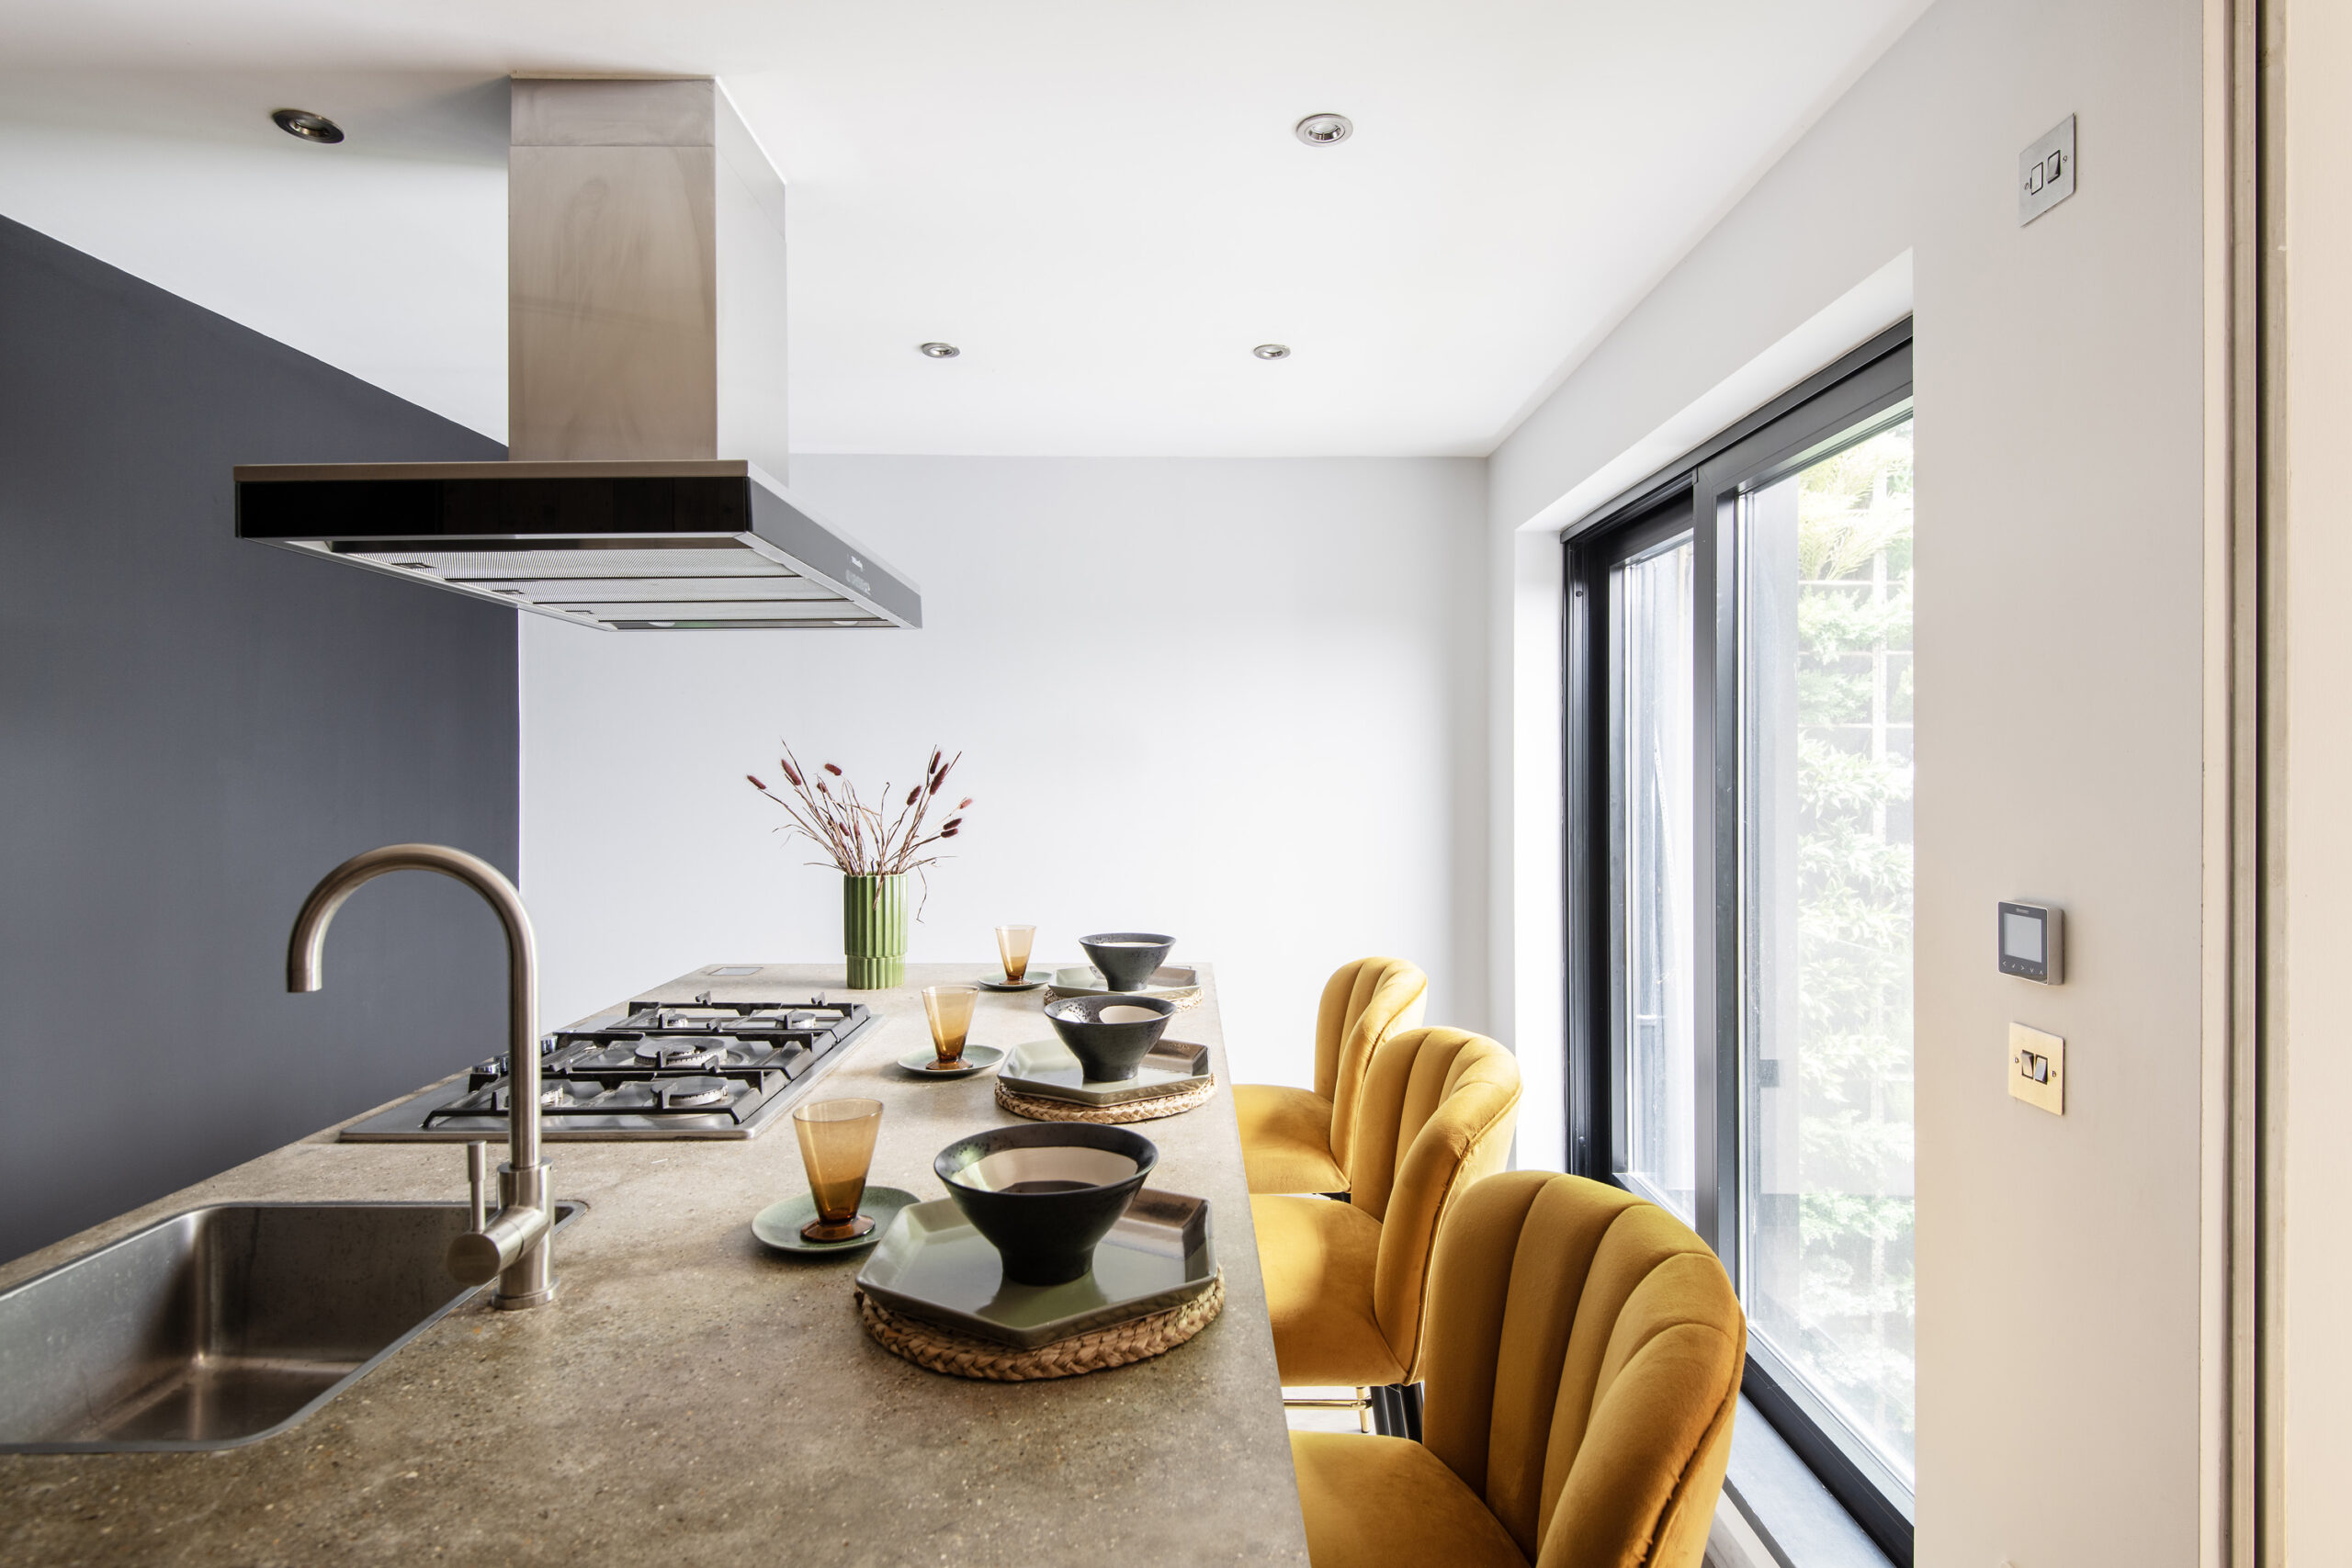 Design-led luxury kitchen of a two bedroom Notting Hill duplex apartment for sale